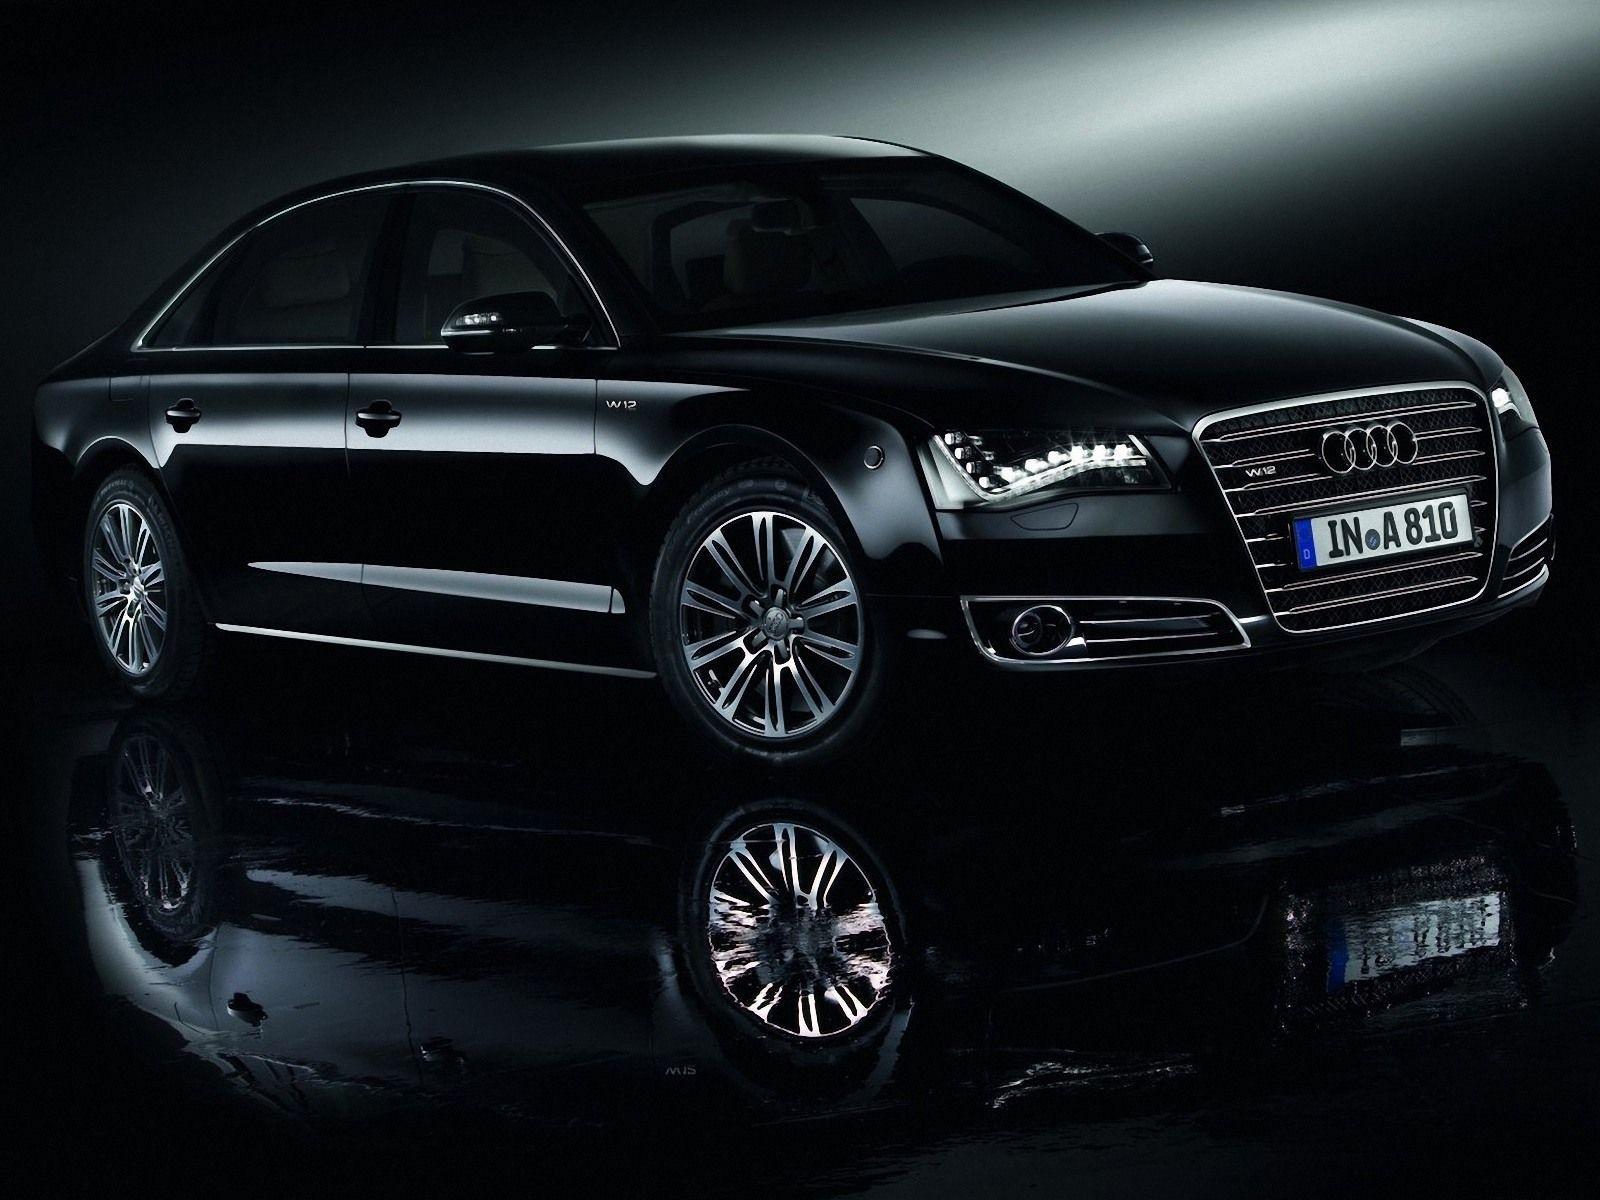 Audi A8 Wallpapers